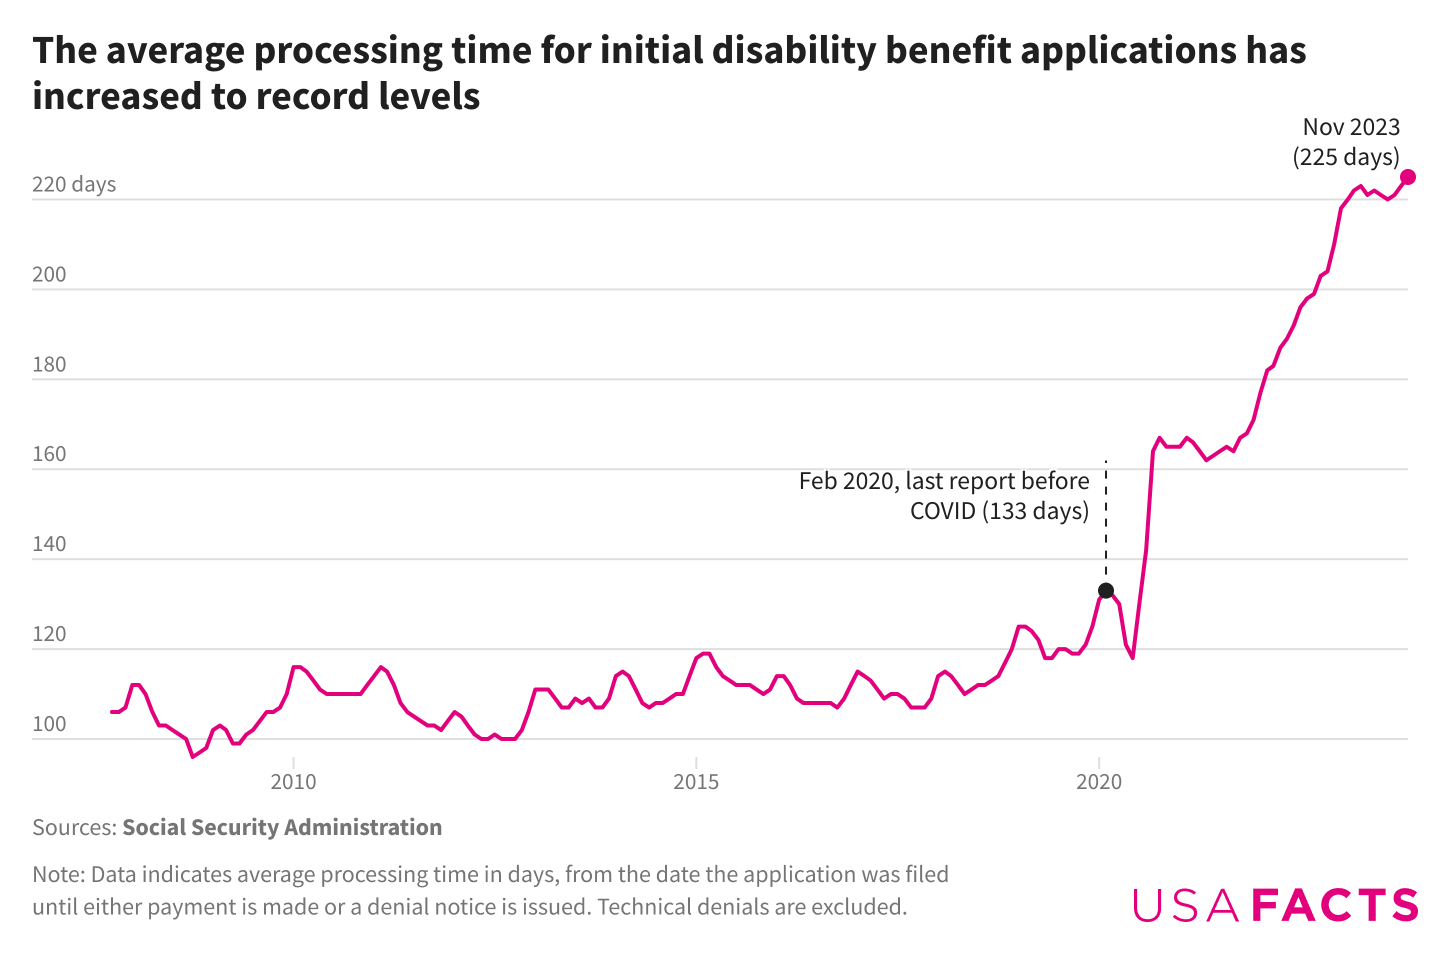 A line chart showing growth in processing time for initial disability applications. From 2008 to approximately 2015, the wait time remained between 100 and 120 days, by February 2020 this was up to 133 days and steadily increased to 225 days in November 2023.